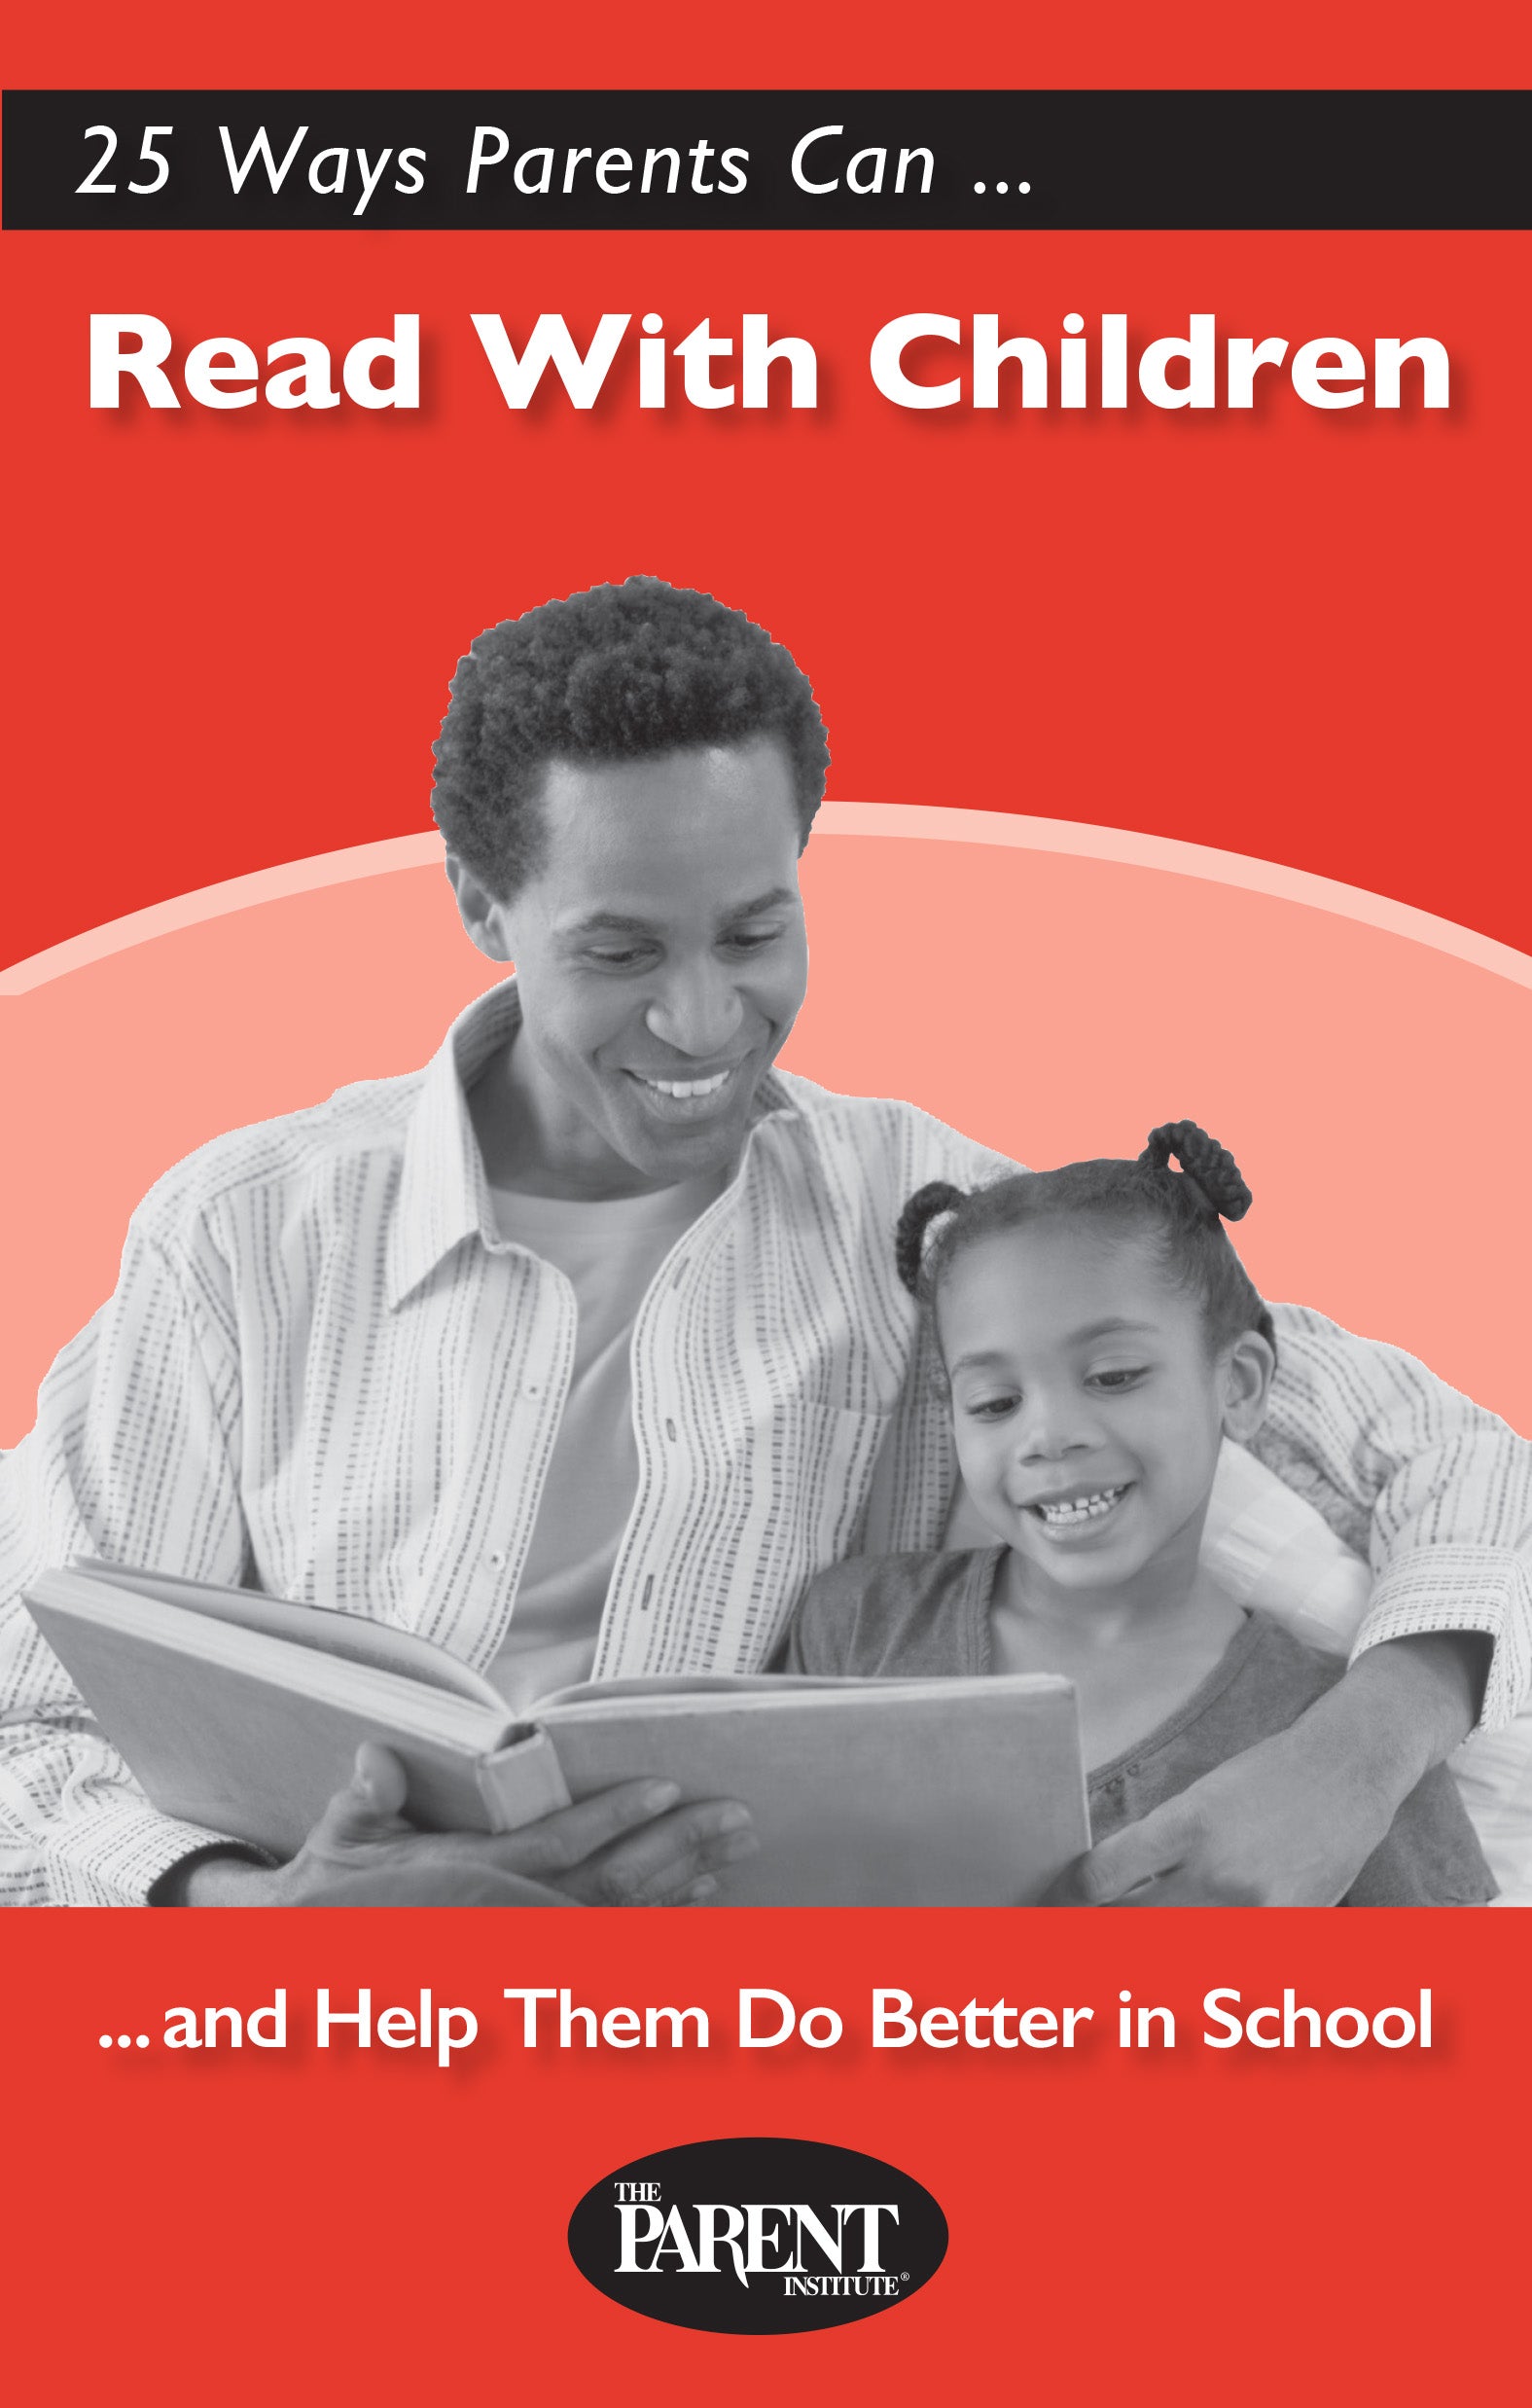 25 Ways Parents Can Read with Children